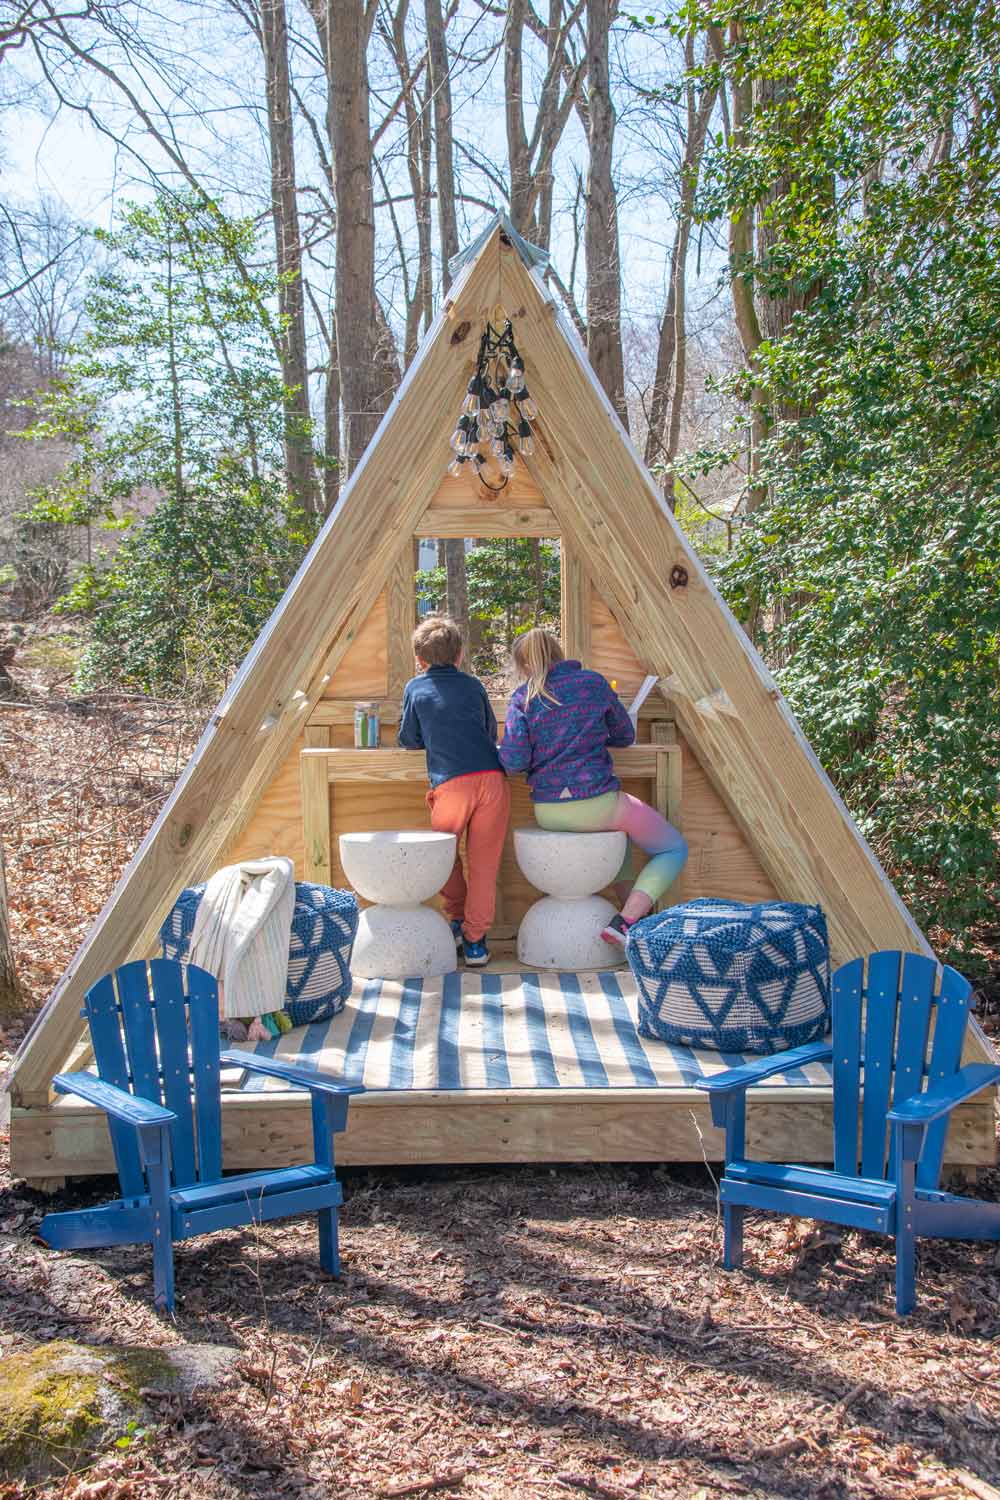 Boy and girl playing in a Luxury A-frame playhouse with two stools, two poofs, and a blue chair.